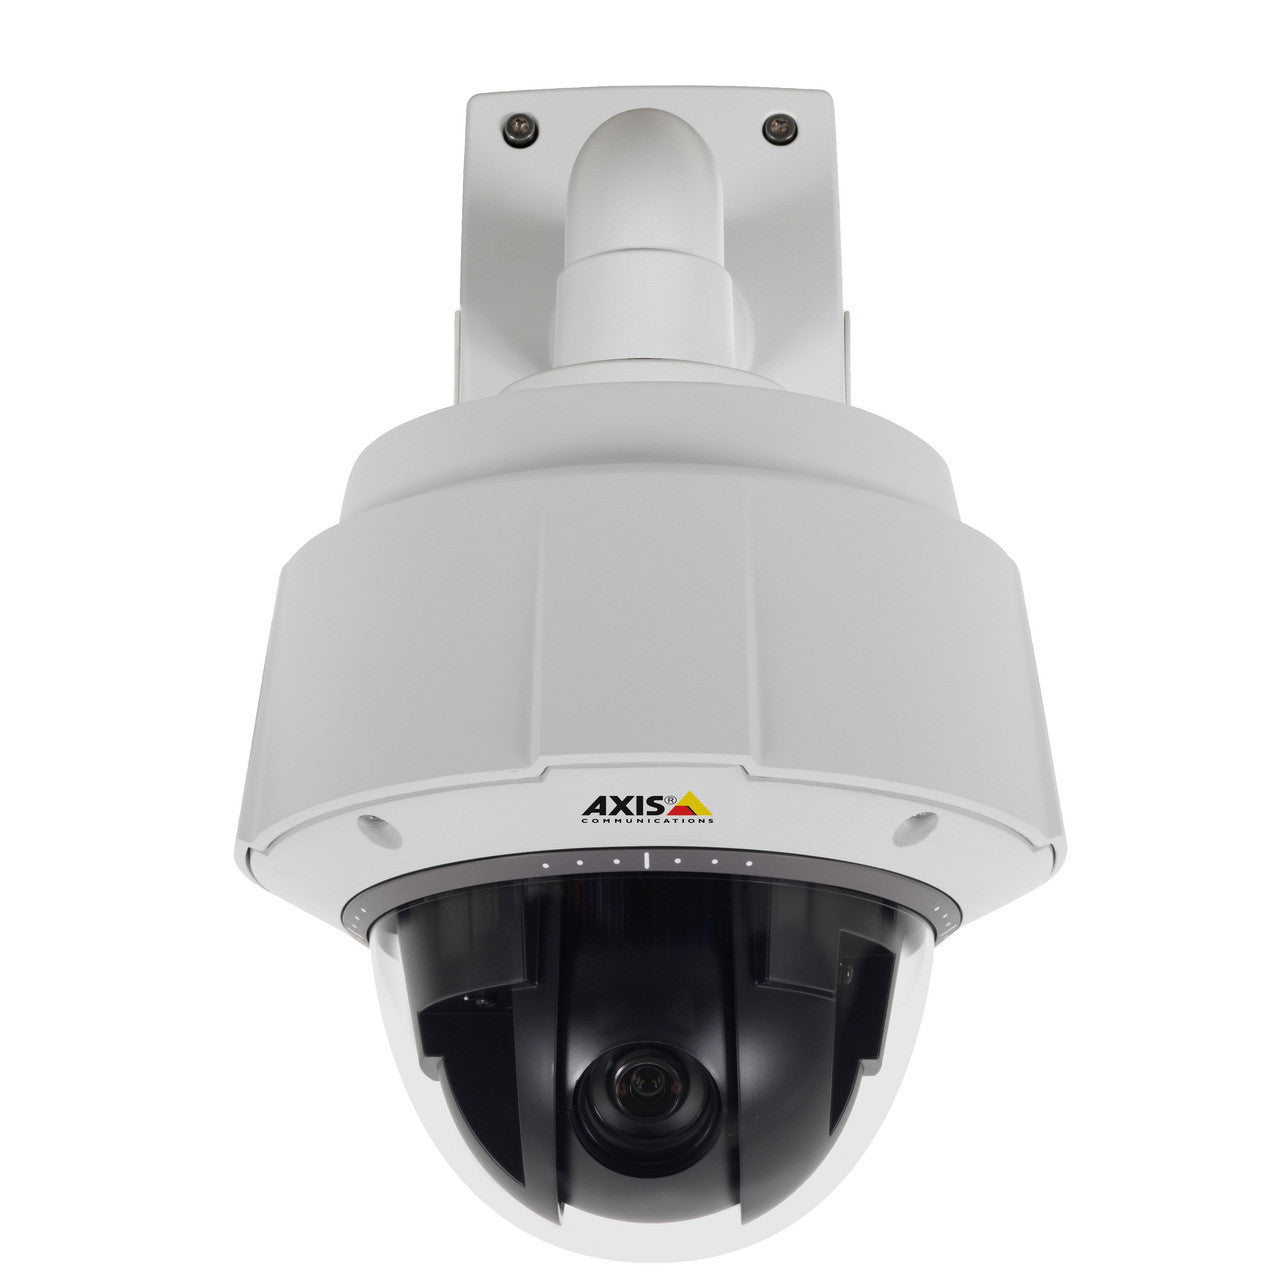 AXIS Q6045-E with T91A61 Wall Mount (not included)